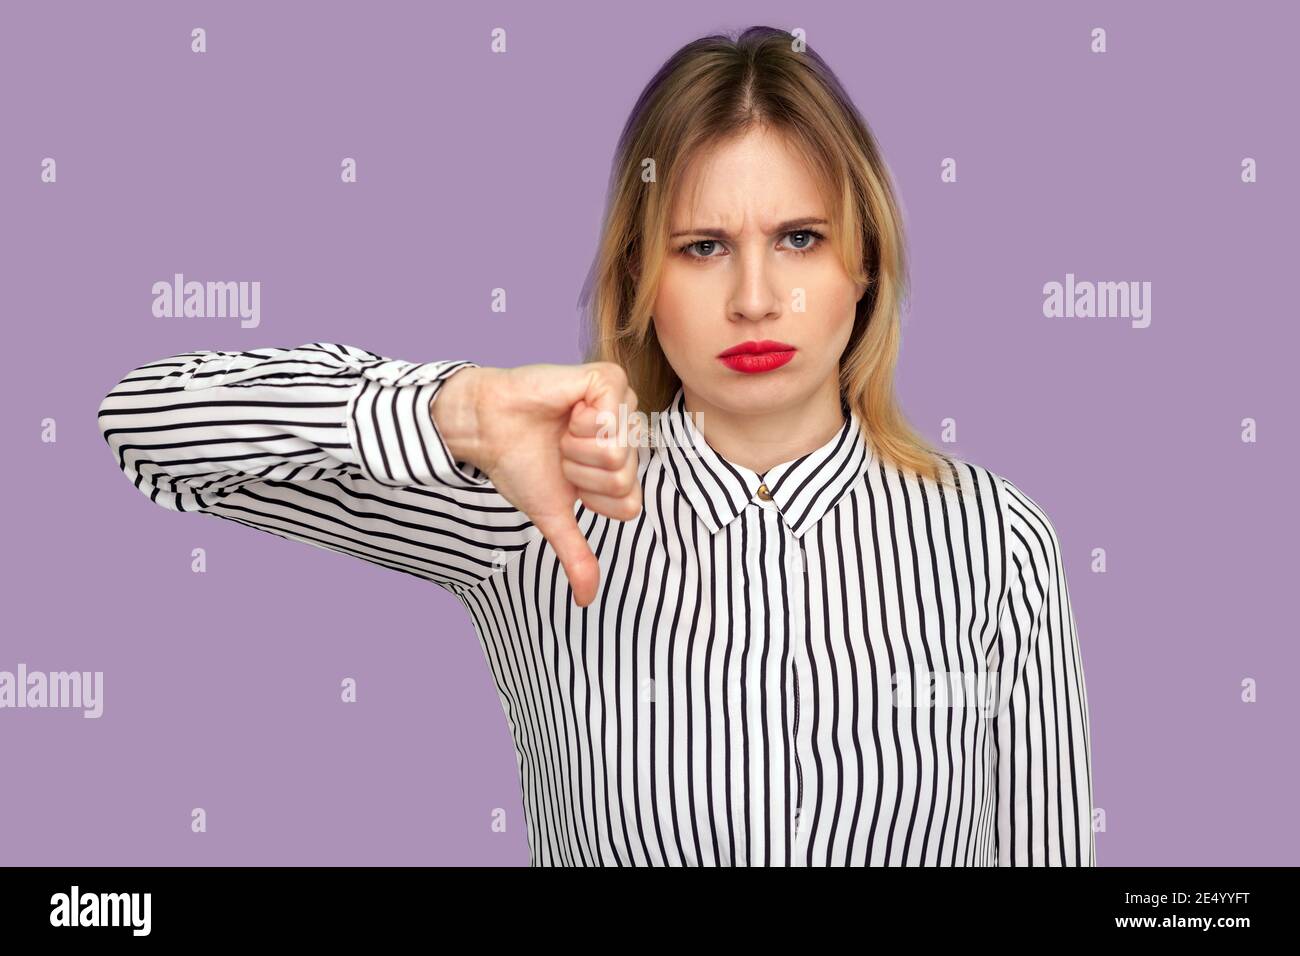 Dislike! Attractive blond woman frowning with naughty expression and showing thumbs down, expressing disapproval, negative feedback. indoor studio sho Stock Photo